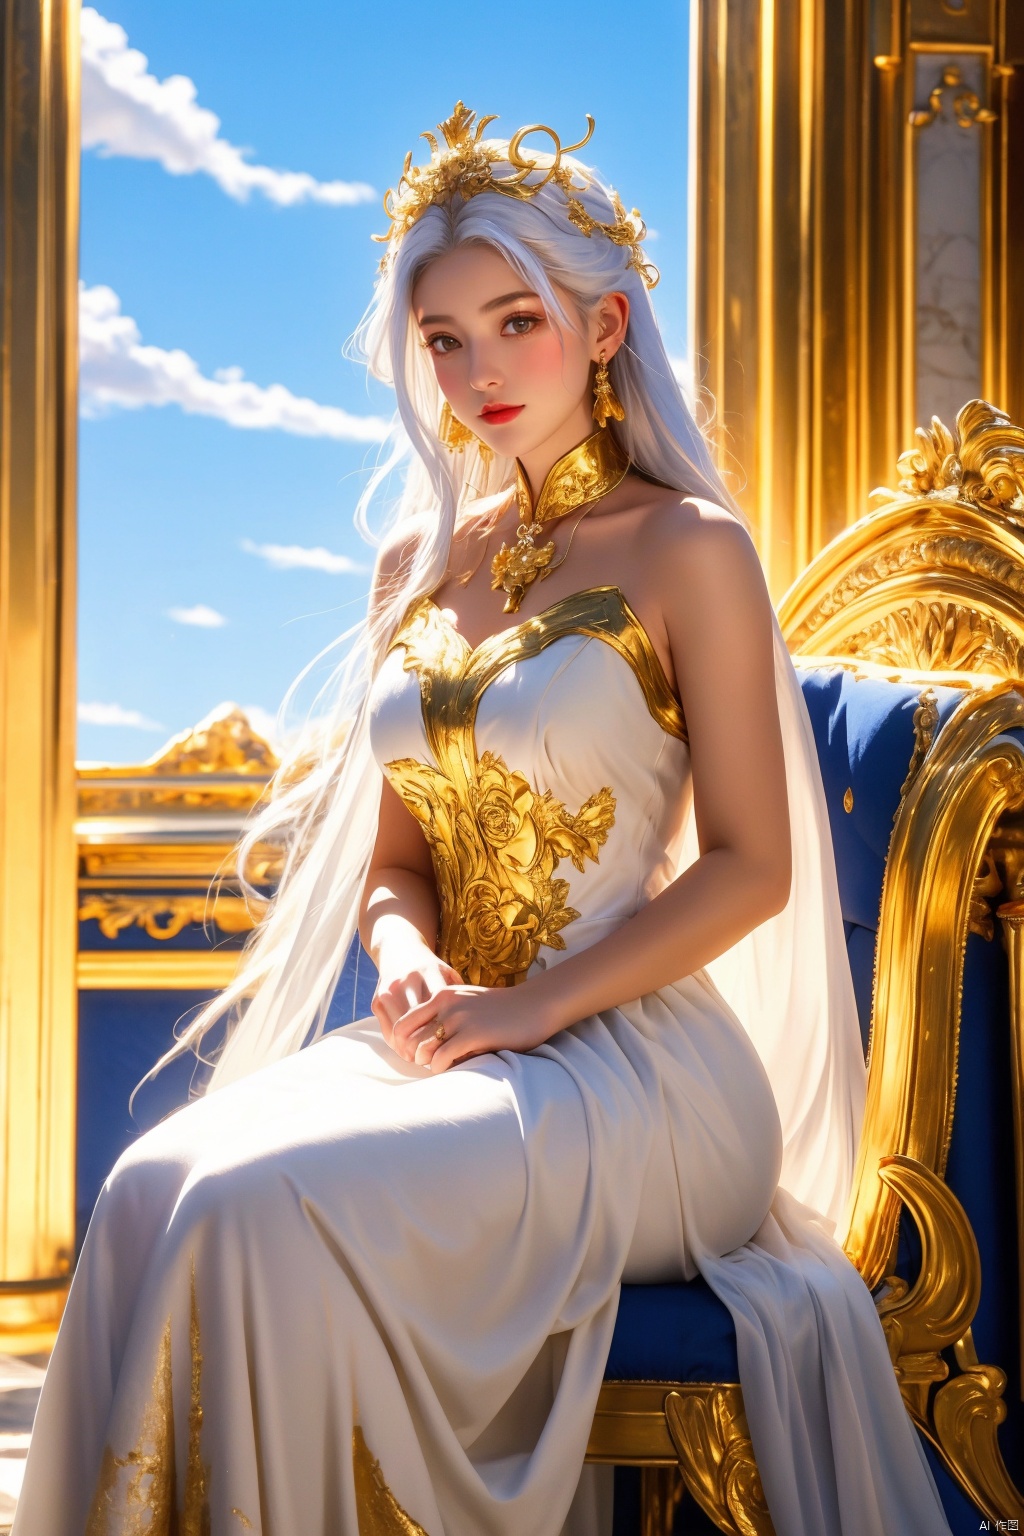 masterpiece, 1 girl, Look at me, Medusa, White hair, Greek dress, Palace, Sitting on the throne, resplendent, Lots of roses, gilded, MYTHOS, Gold powder, Golden glow, textured skin, super detail, best quality, 16k, Blue sky outside the window